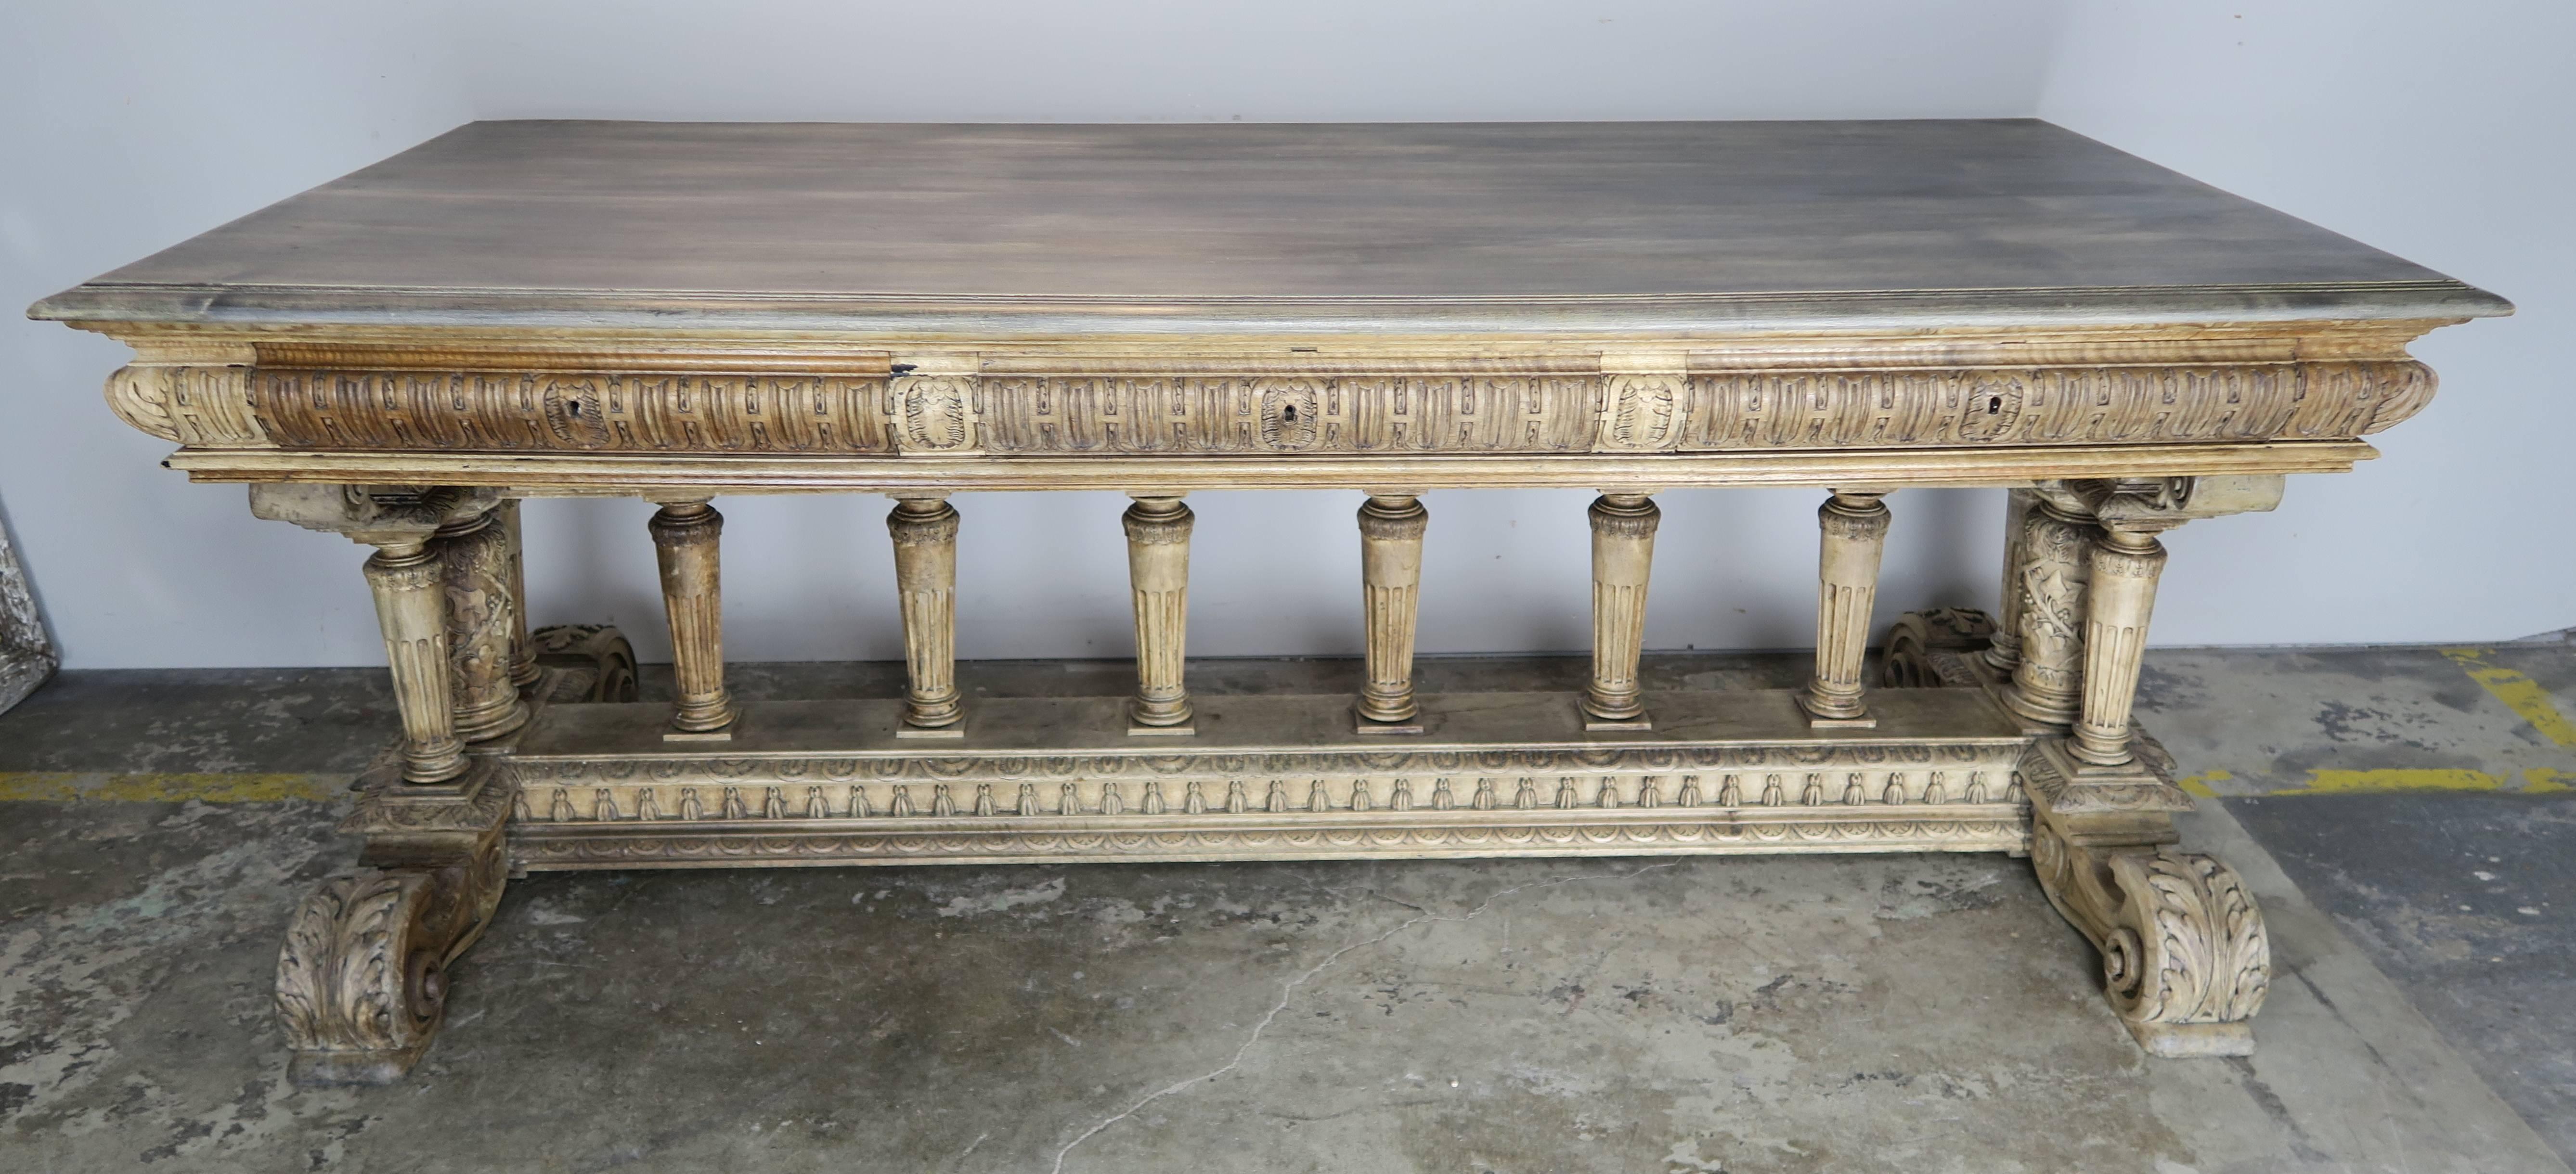 19th century ornately carved Italian Renaissance style table with three drawers.